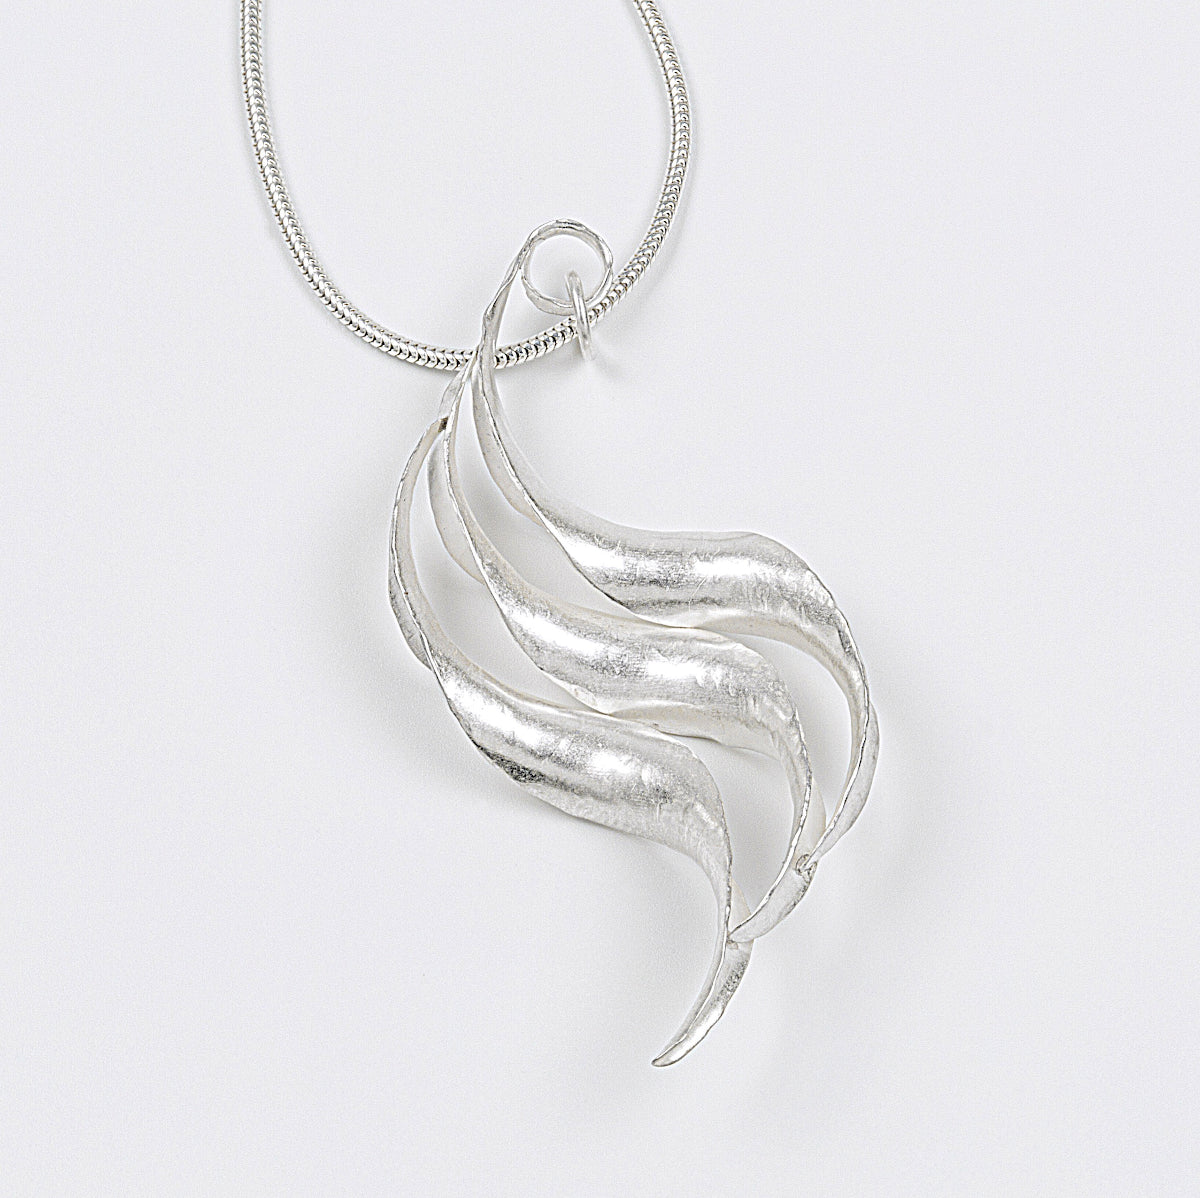 A silver wave necklace, handmade, composed of three curled and twisted units, the top one ending in a loop for the chain. The three units are arranged so that they form a progression. This is a back view.